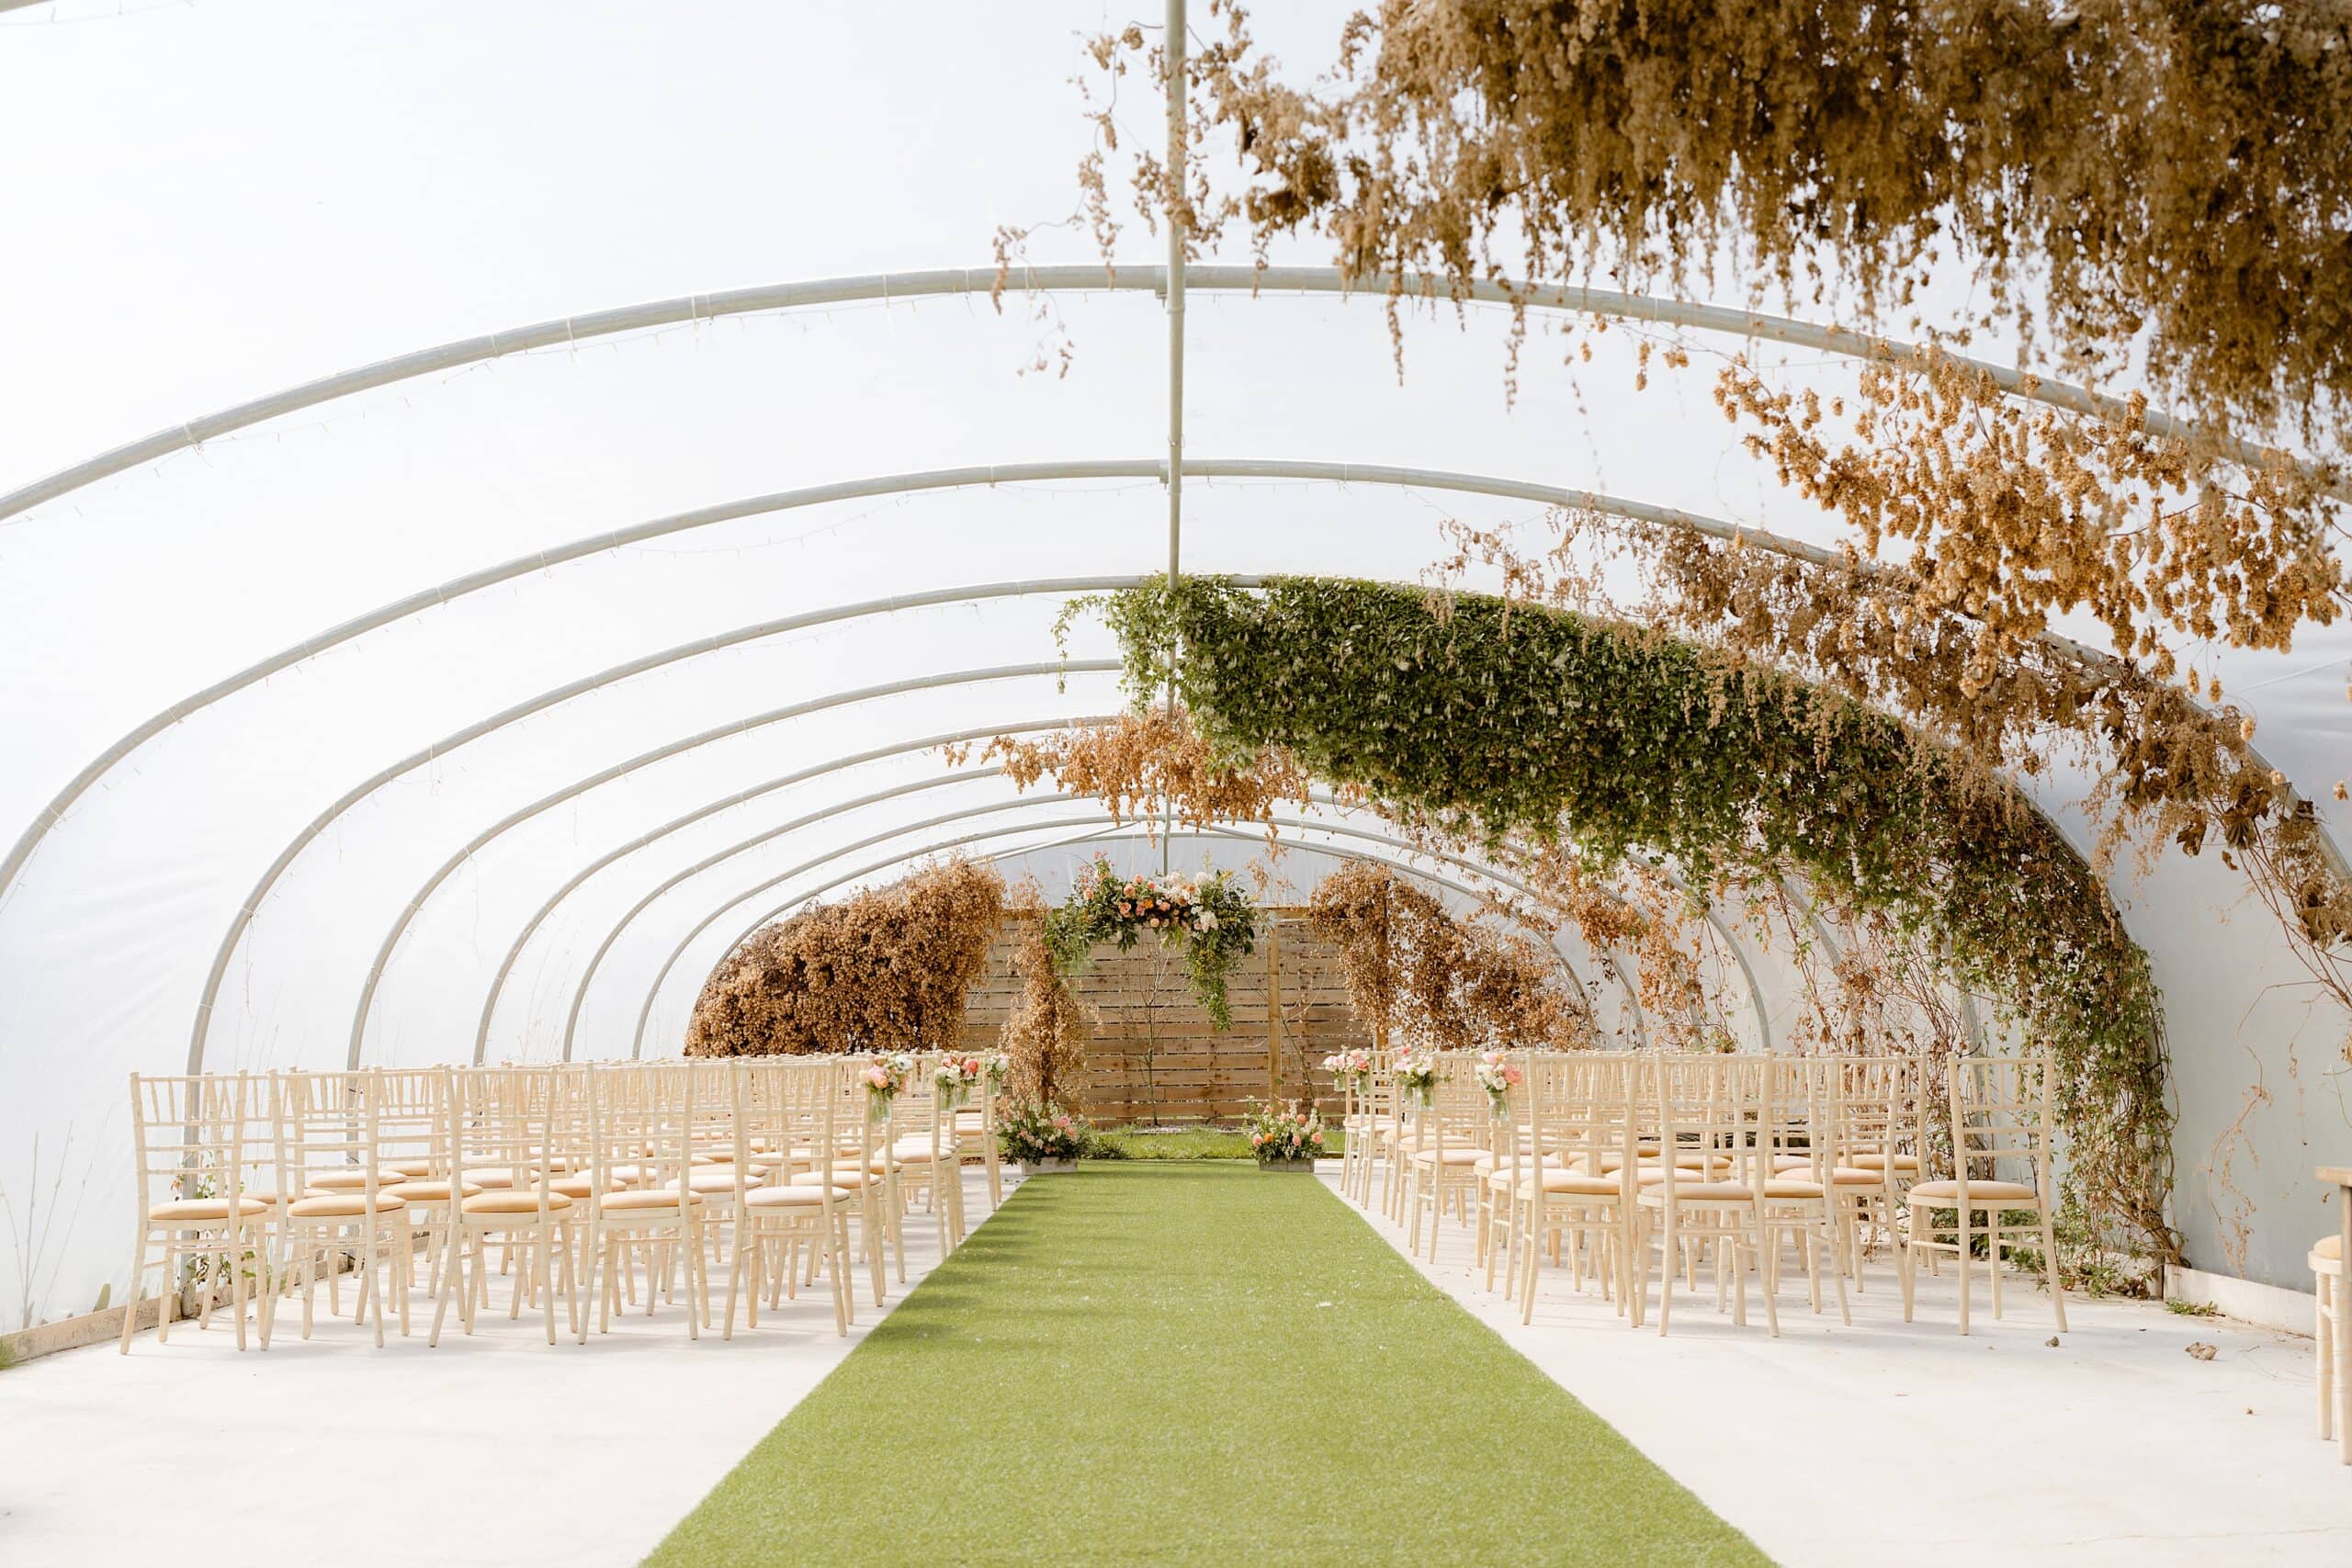 a polytunnel set with chairs and greenery for a fun relaxed wedding at a unique wedding venue near edinburgh in scotland